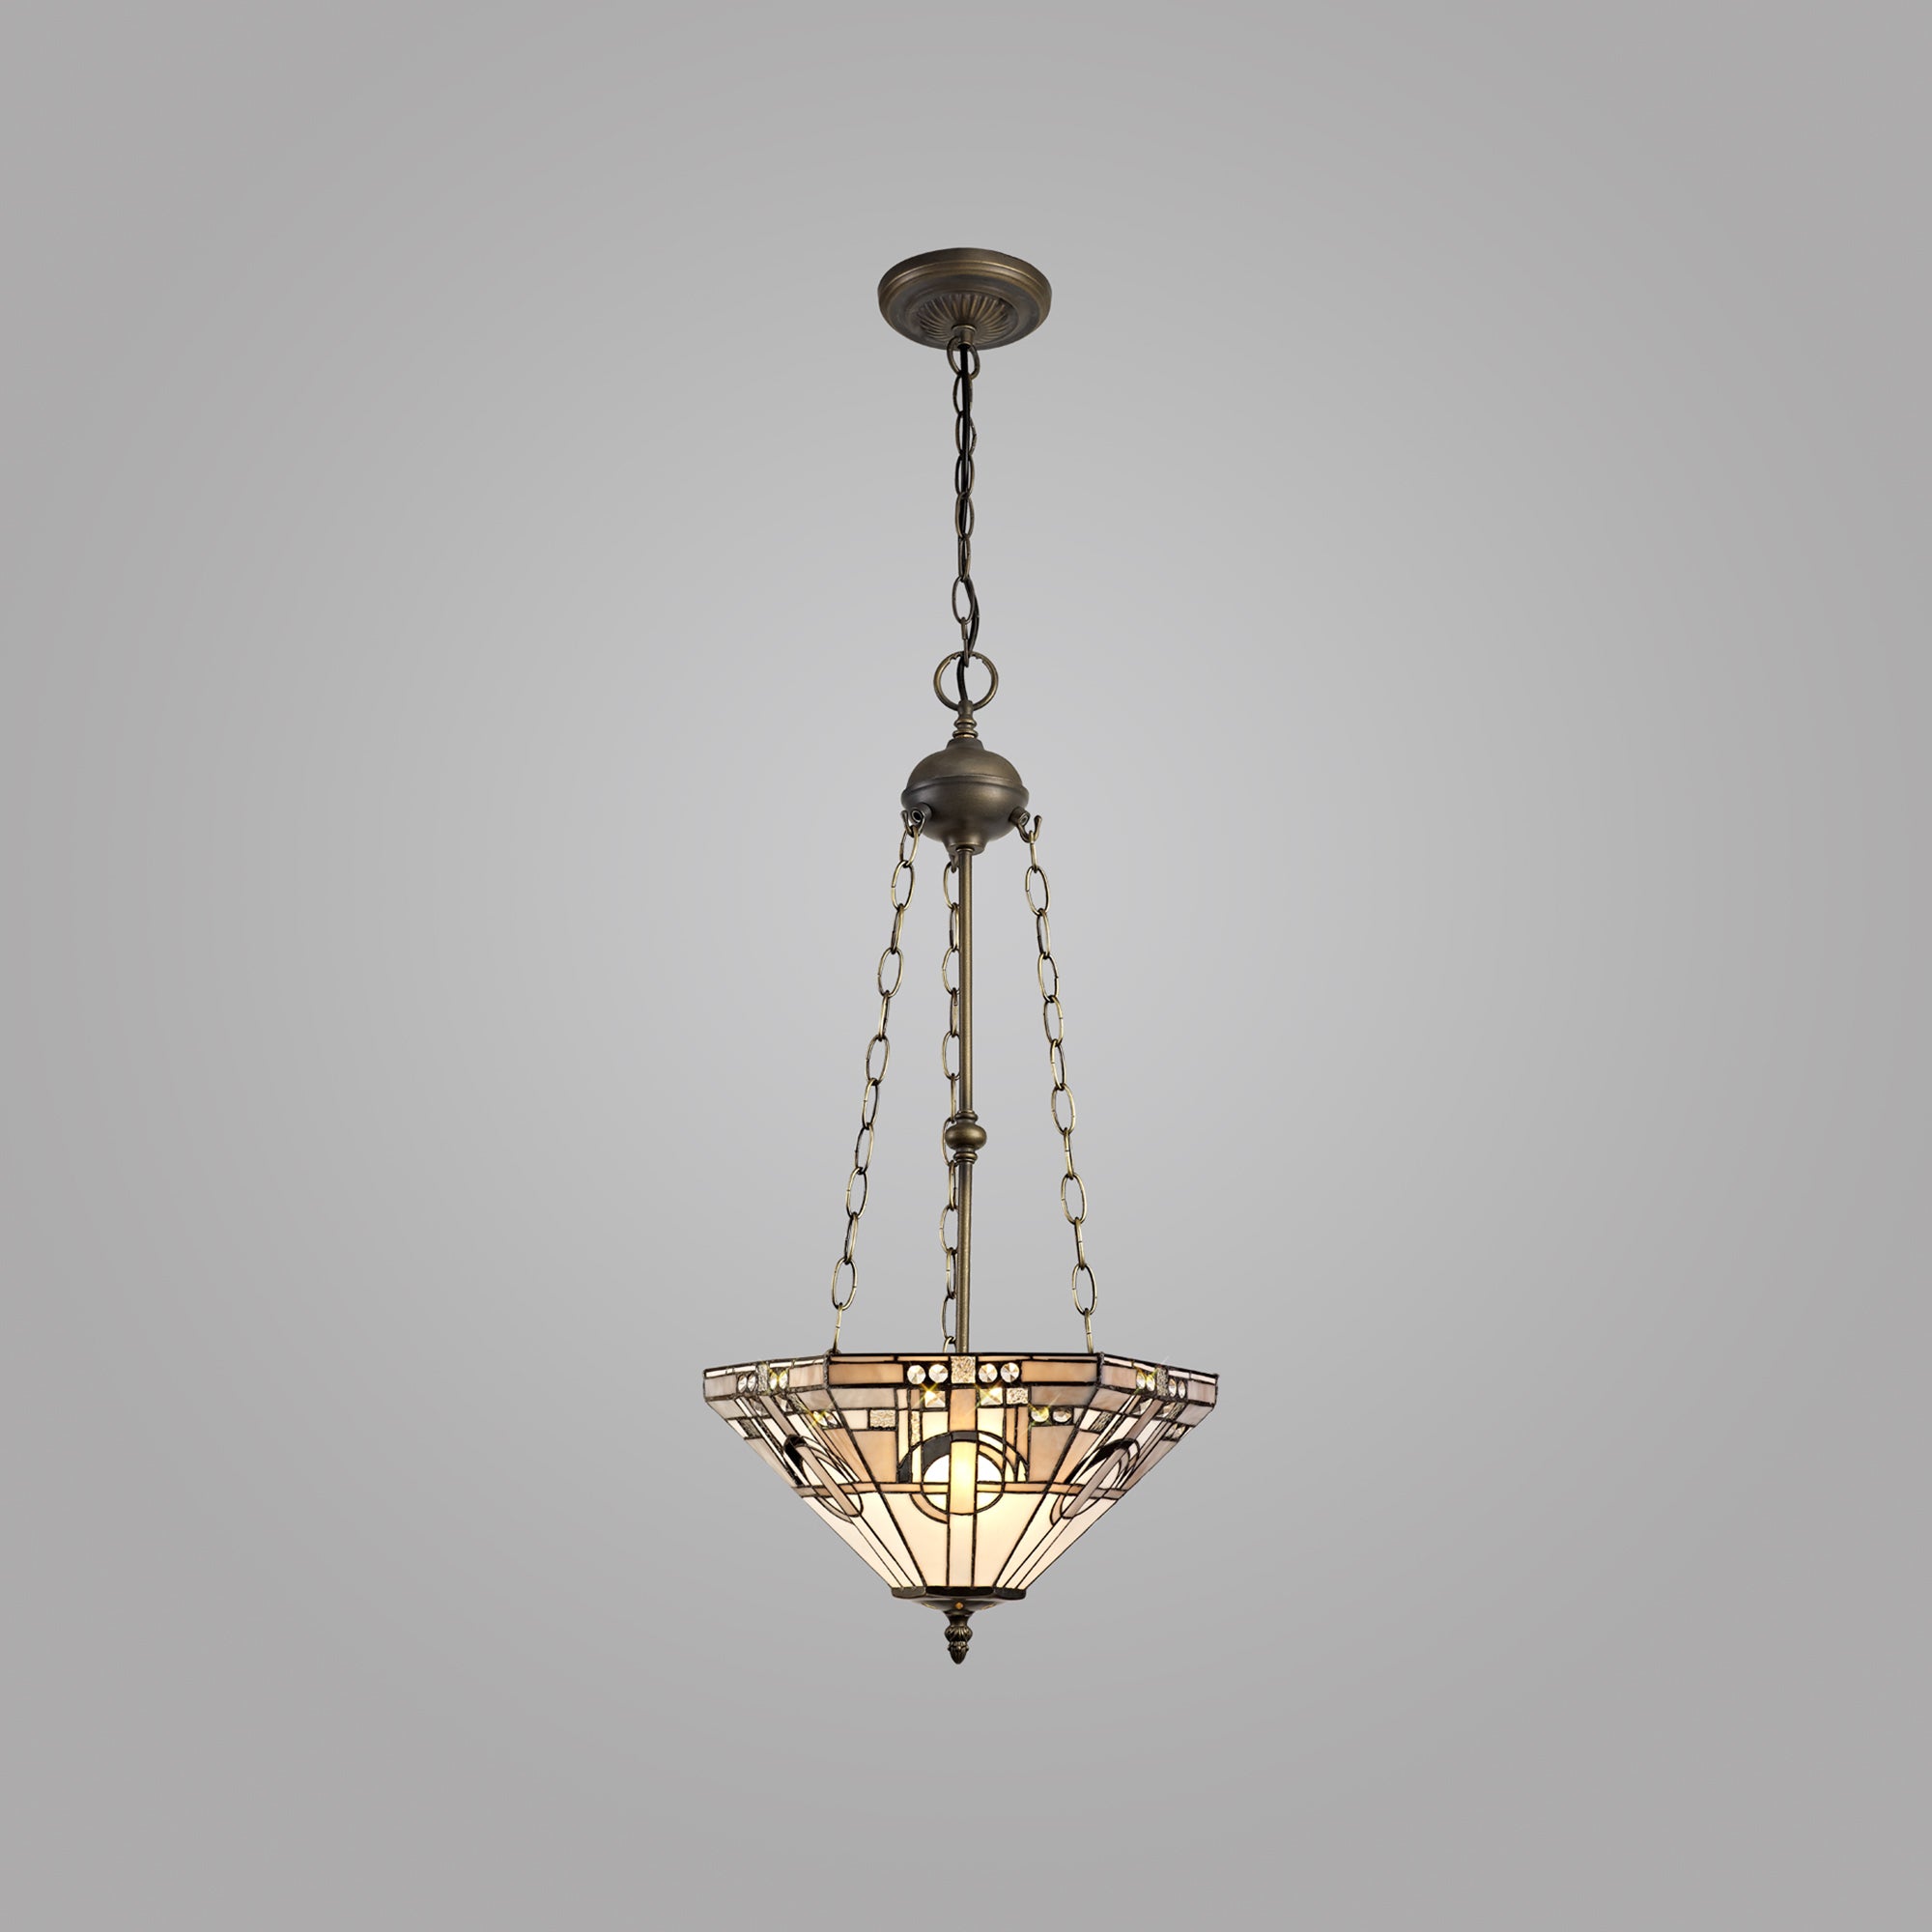 Atek 3 Light Uplighter Pendant E27 With 40cm Tiffany Shade, White/Grey/Black/Clear Crystal/Aged Antique Brass